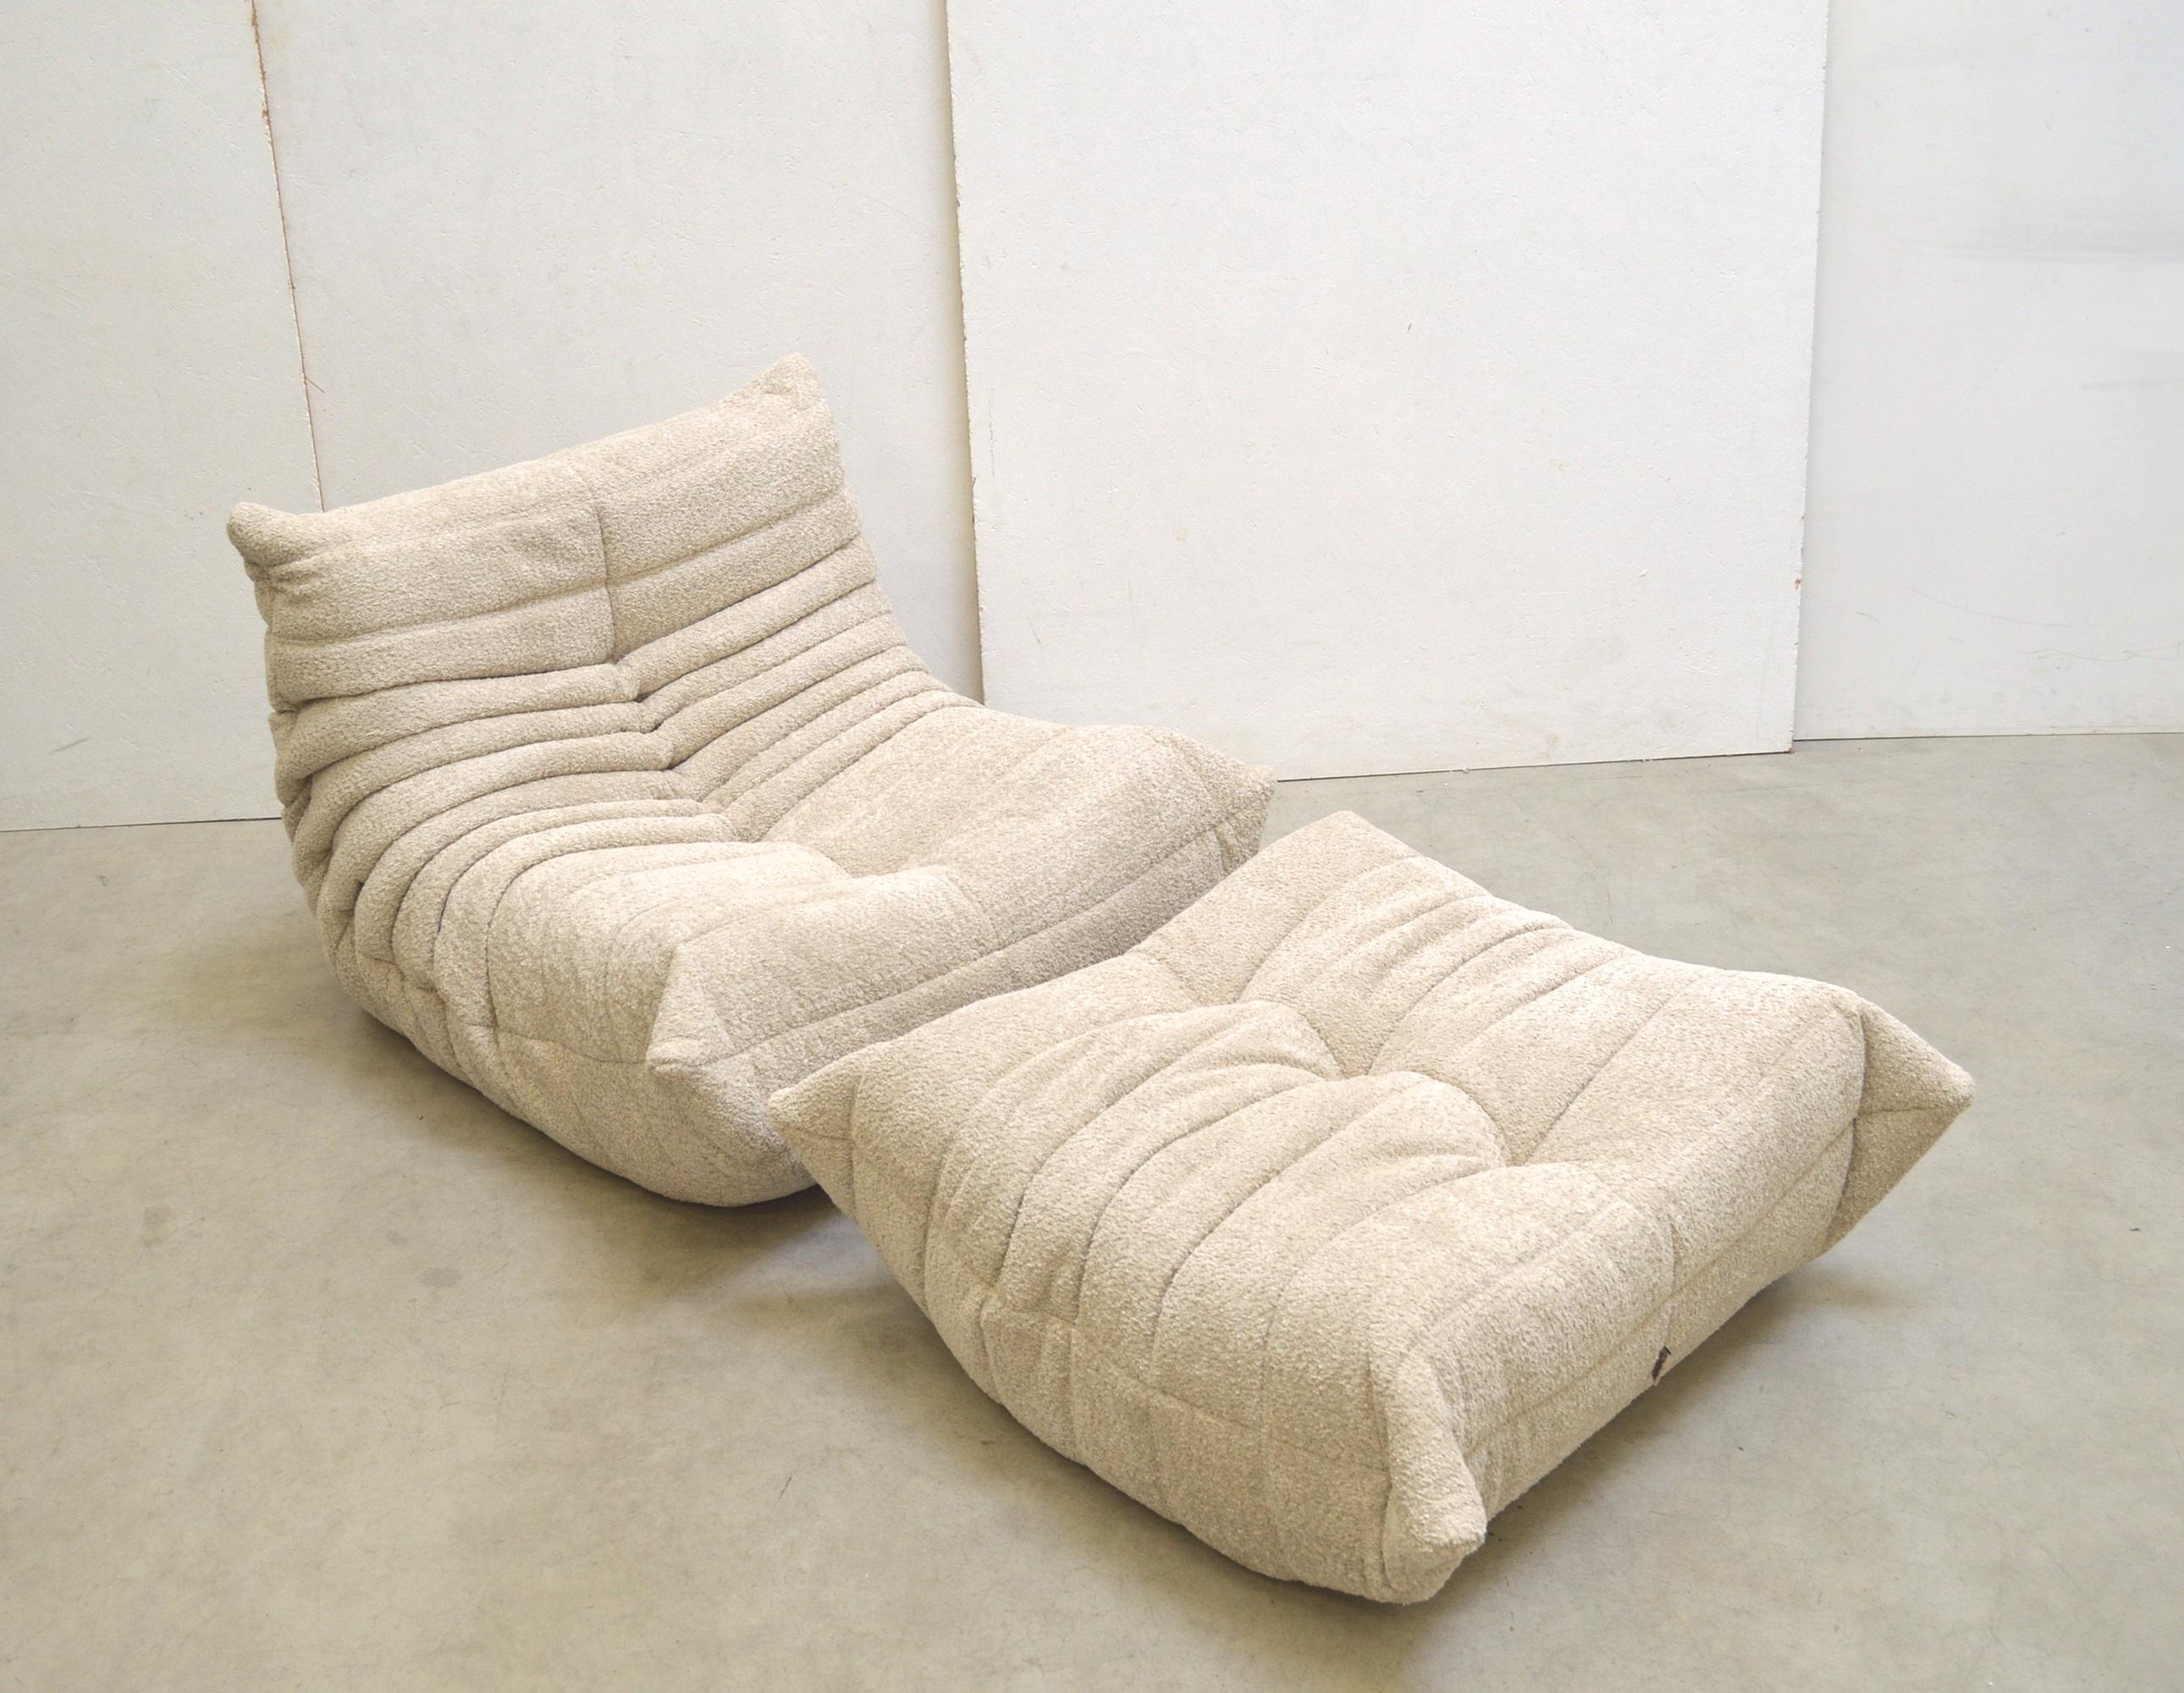 Late 20th Century Bouclé Edition Togo Seating Group Sofa by Michel Ducaroy for Ligne Roset 1973